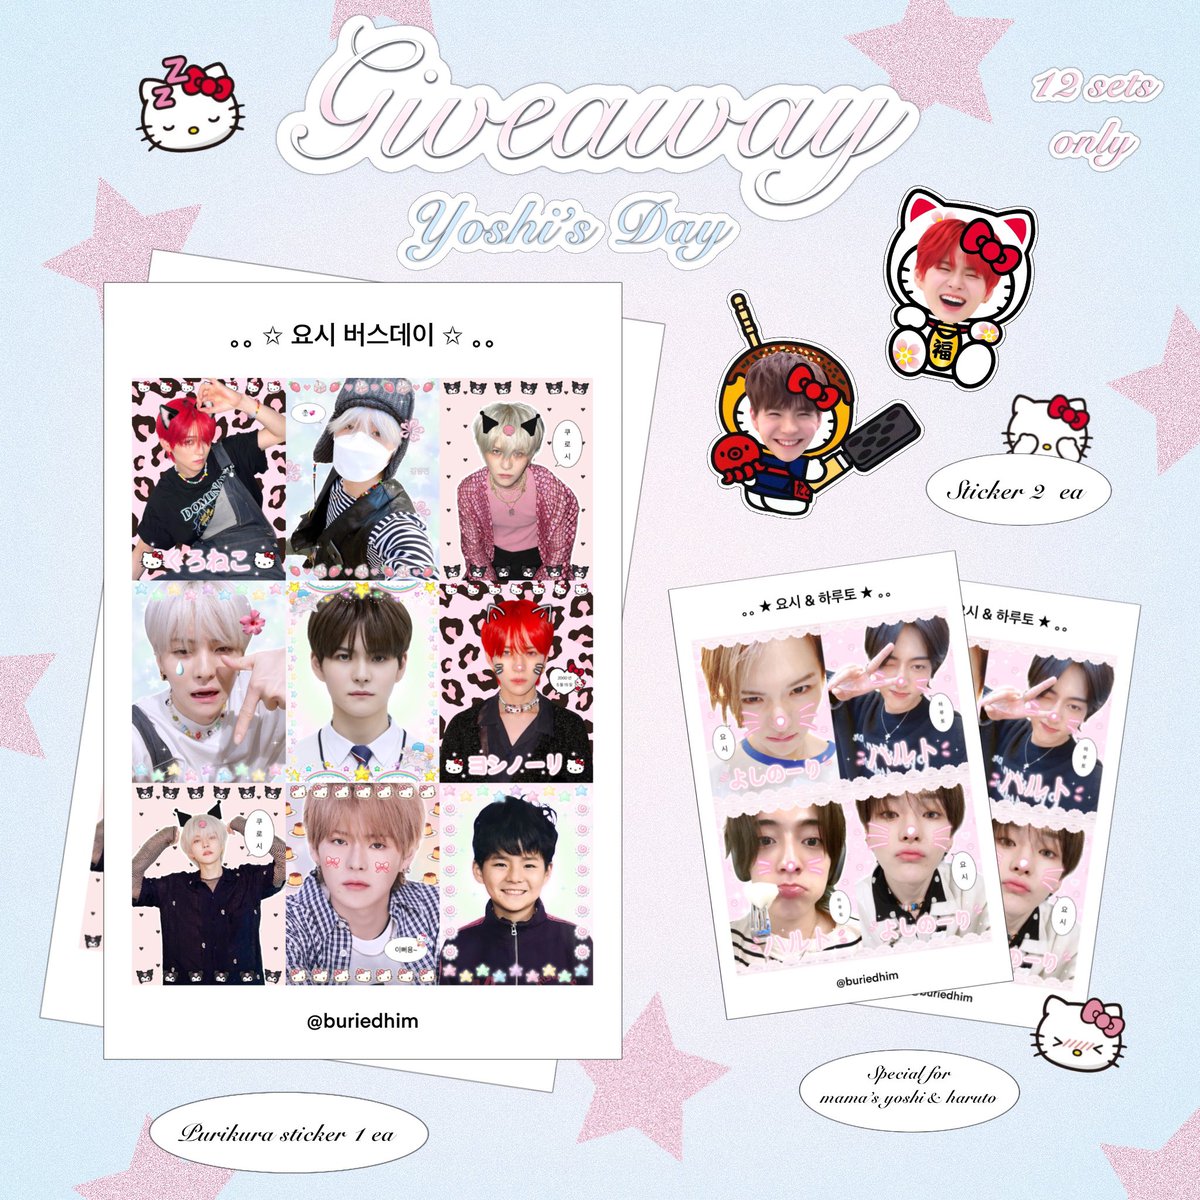 pls kindly rt ♡

𝓖iveaway for 𝒴oshi’s birthday 🎂🩶

♡ purikura sticker 1 ea
♡ stickers 2 ea
♡ special sticker for mama’s yoshi & haruto 1 ea

* 12 sets only / shipping fee 30 b.
* gg form : 15 may, 8:30 pm ⭐️
#HAPPYYOSHIDAY